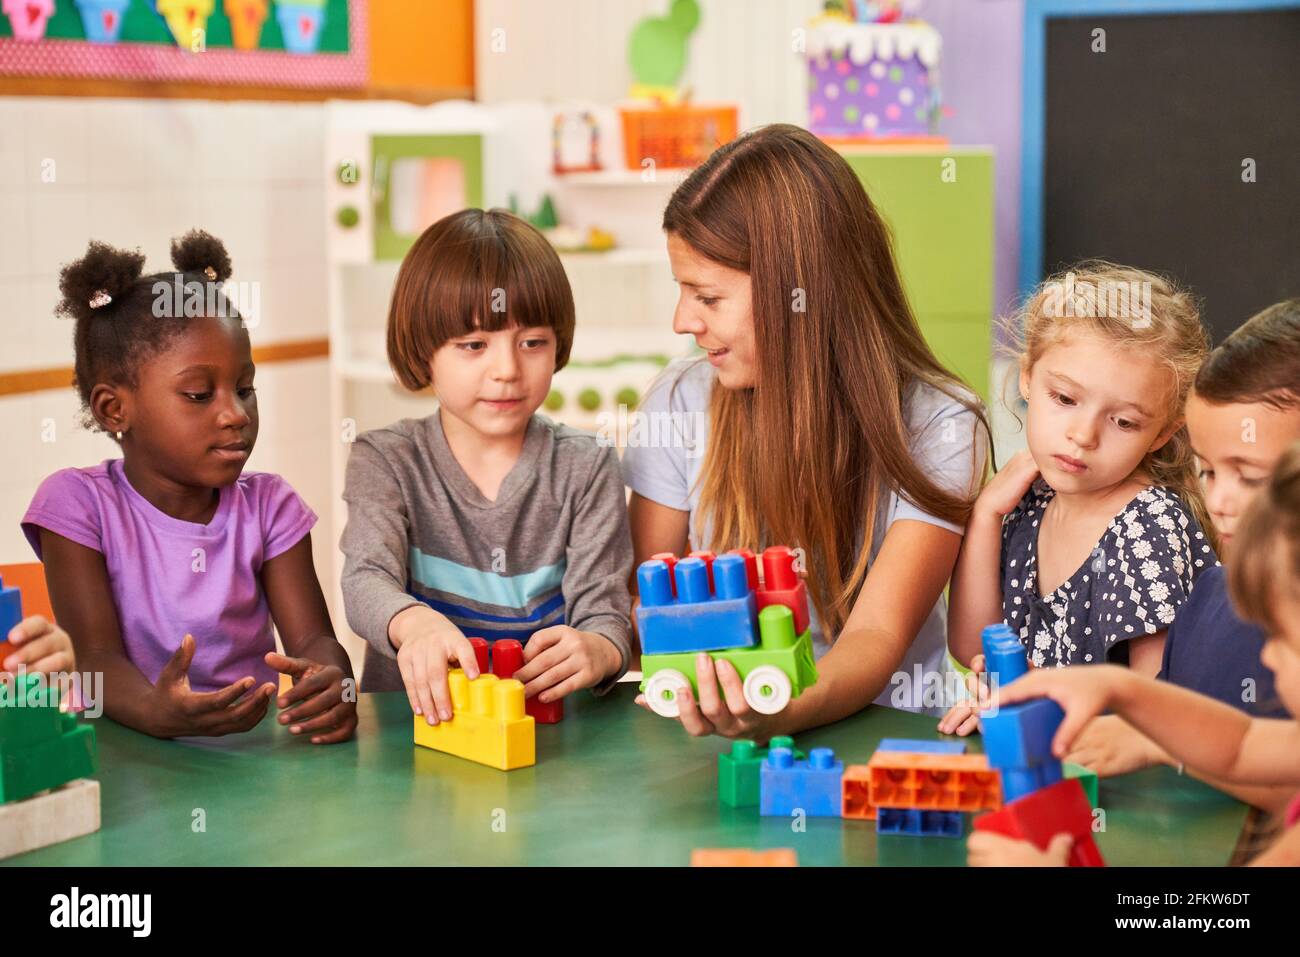 The educator and children in the international kindergarten play together with colorful building blocks Stock Photo